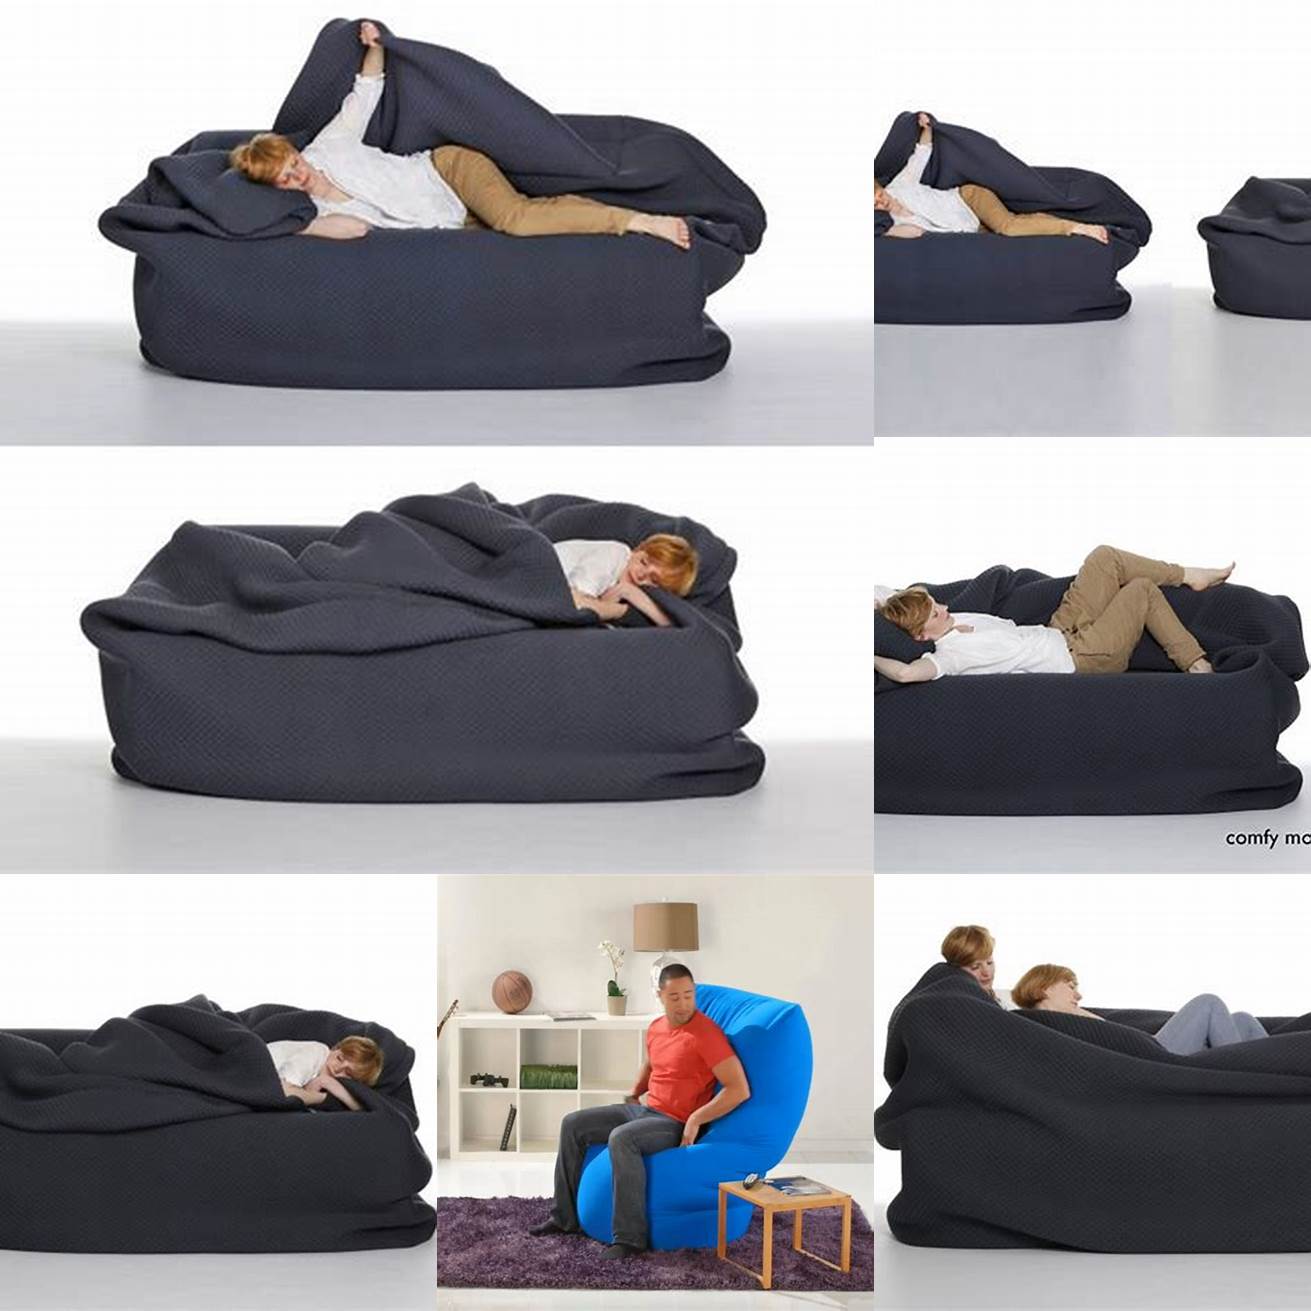 Image of someone using the Bean Bag Bed with Built In Blanket